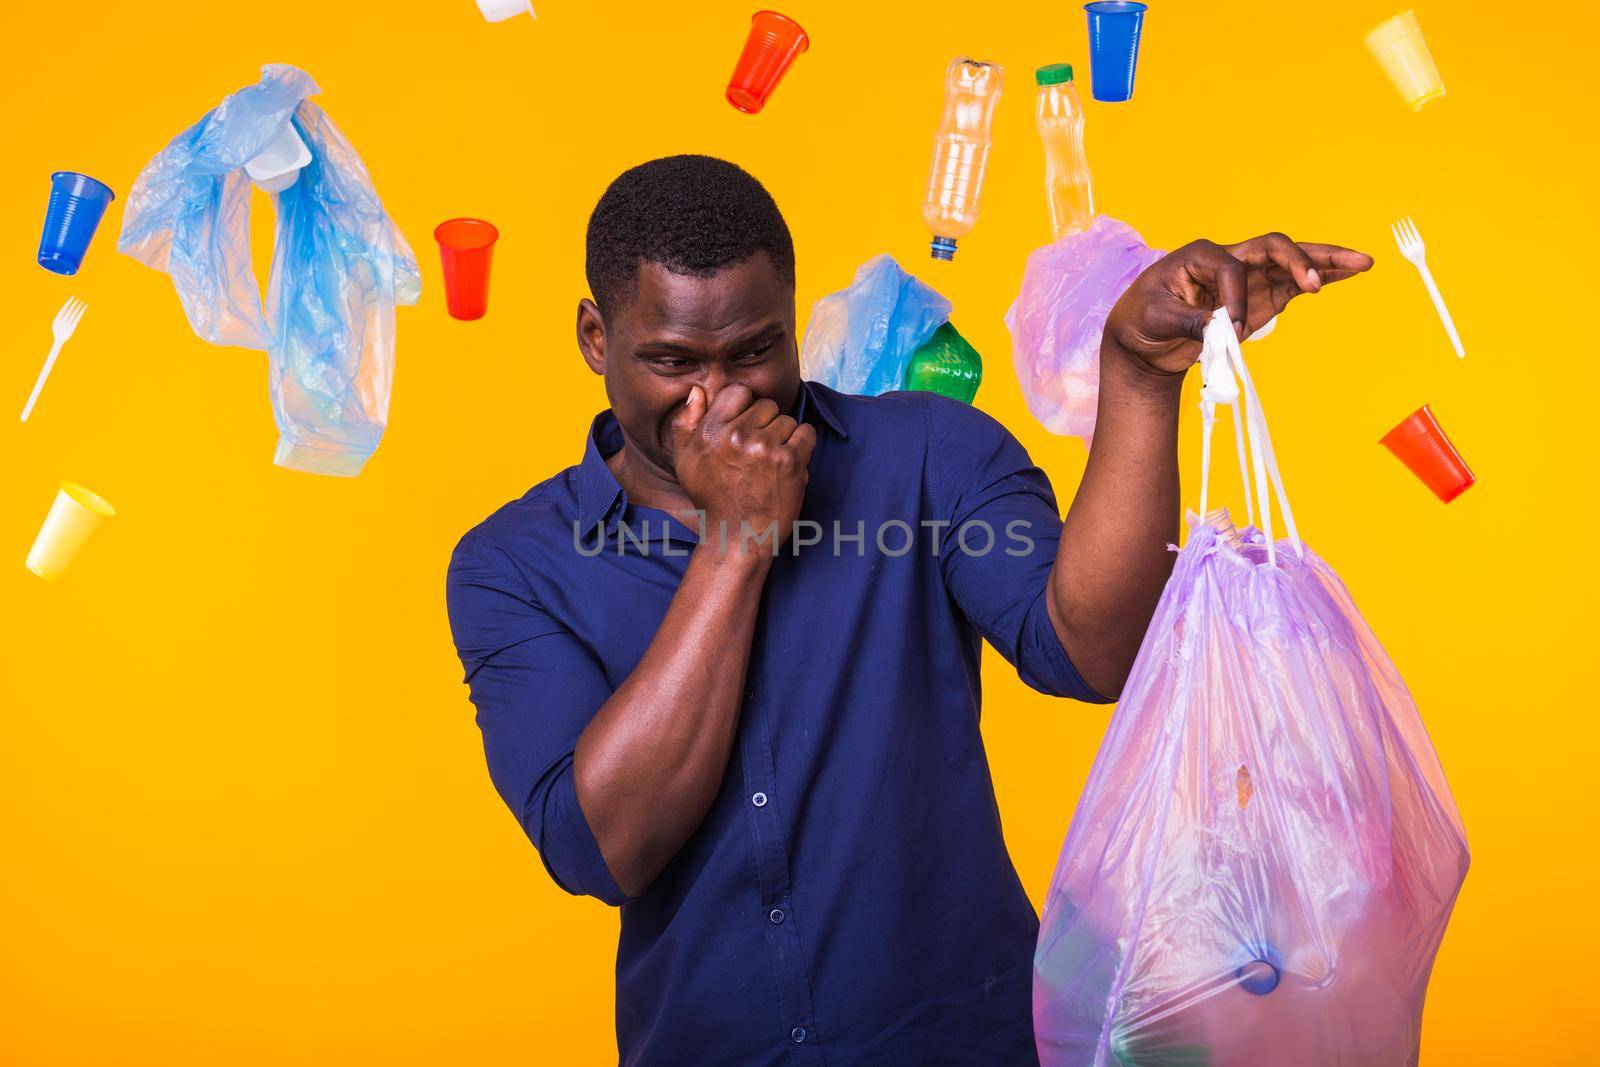 Environmental pollution, plastic recycling problem and waste disposal concept - angry man holding garbage bag on yellow background. He is feel smell of trash.